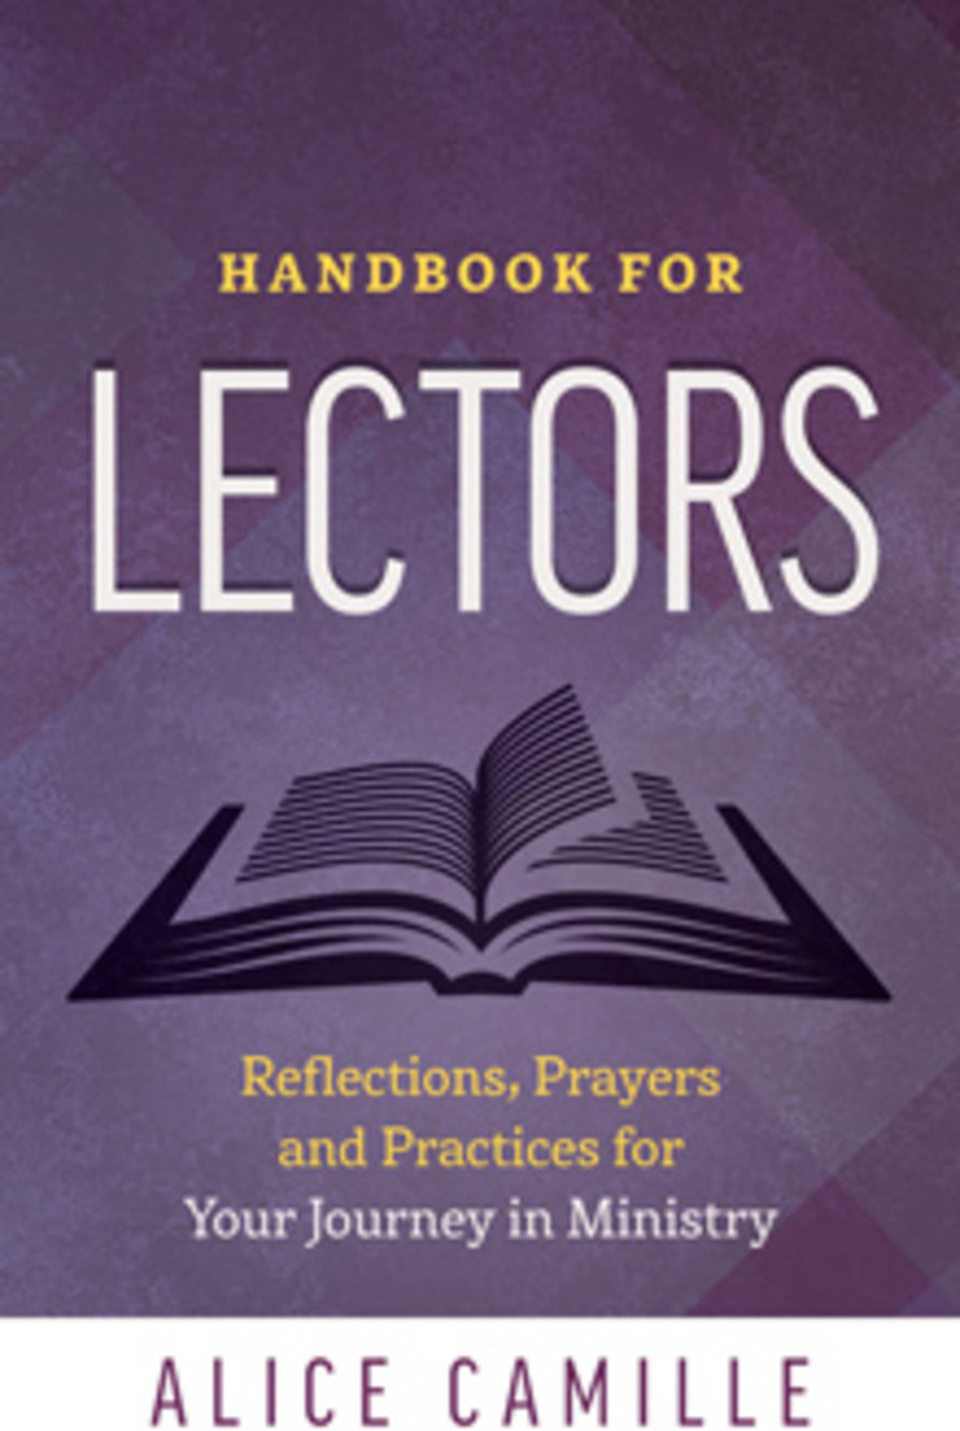 Handbook for Lectors: Reflections, Prayers and Practices for Your Journey in Ministry  by Alice Camille